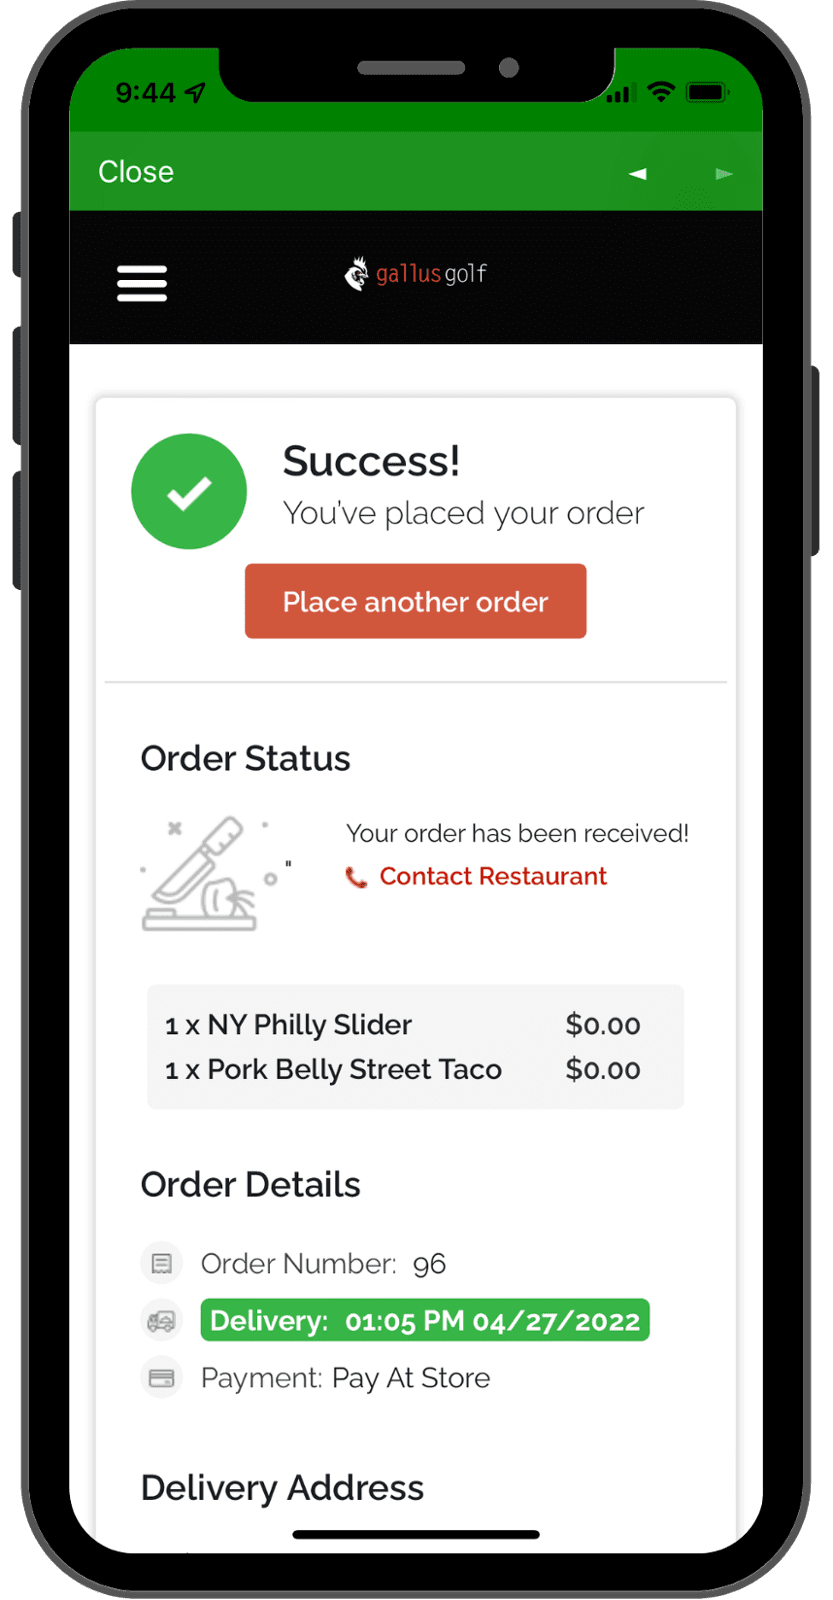 Mobile Food Order Placed